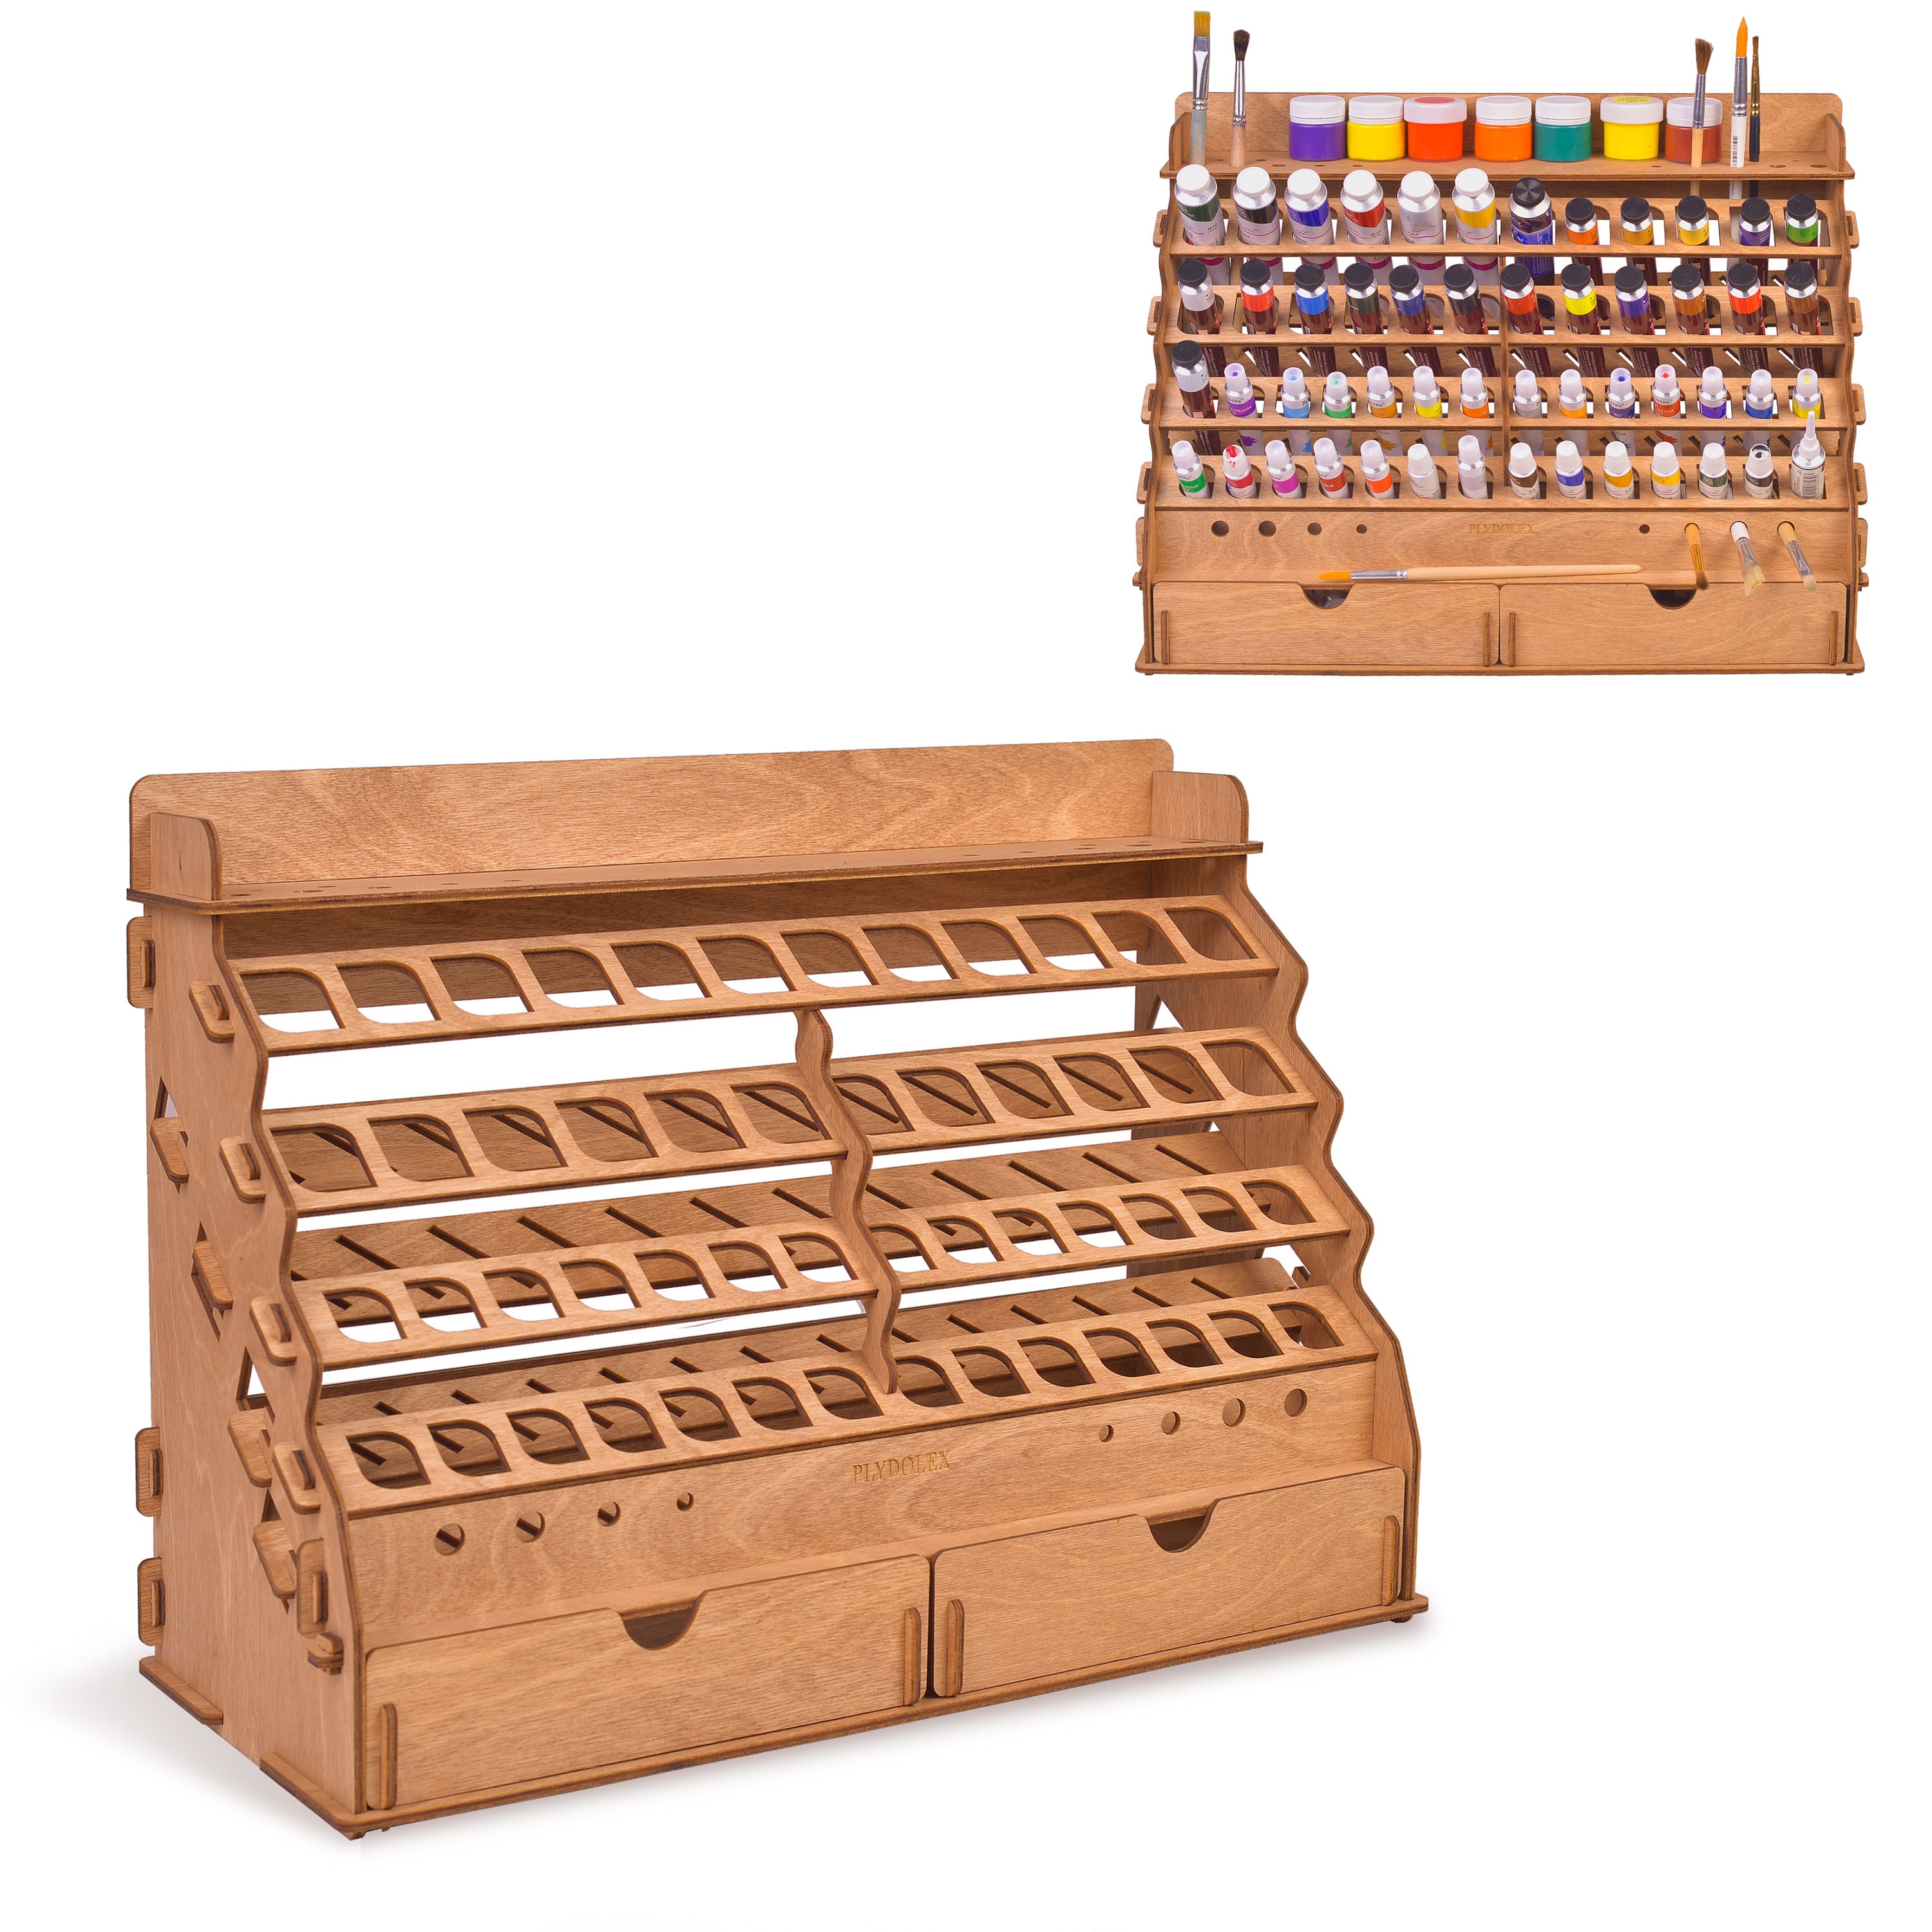 Plydolex Wooden Paint Organizer for 87 Paint Bottles and 14 Brushes - Paint Brush Holder with 6 Miniature Stands and Top Shelf - Convenient Paint